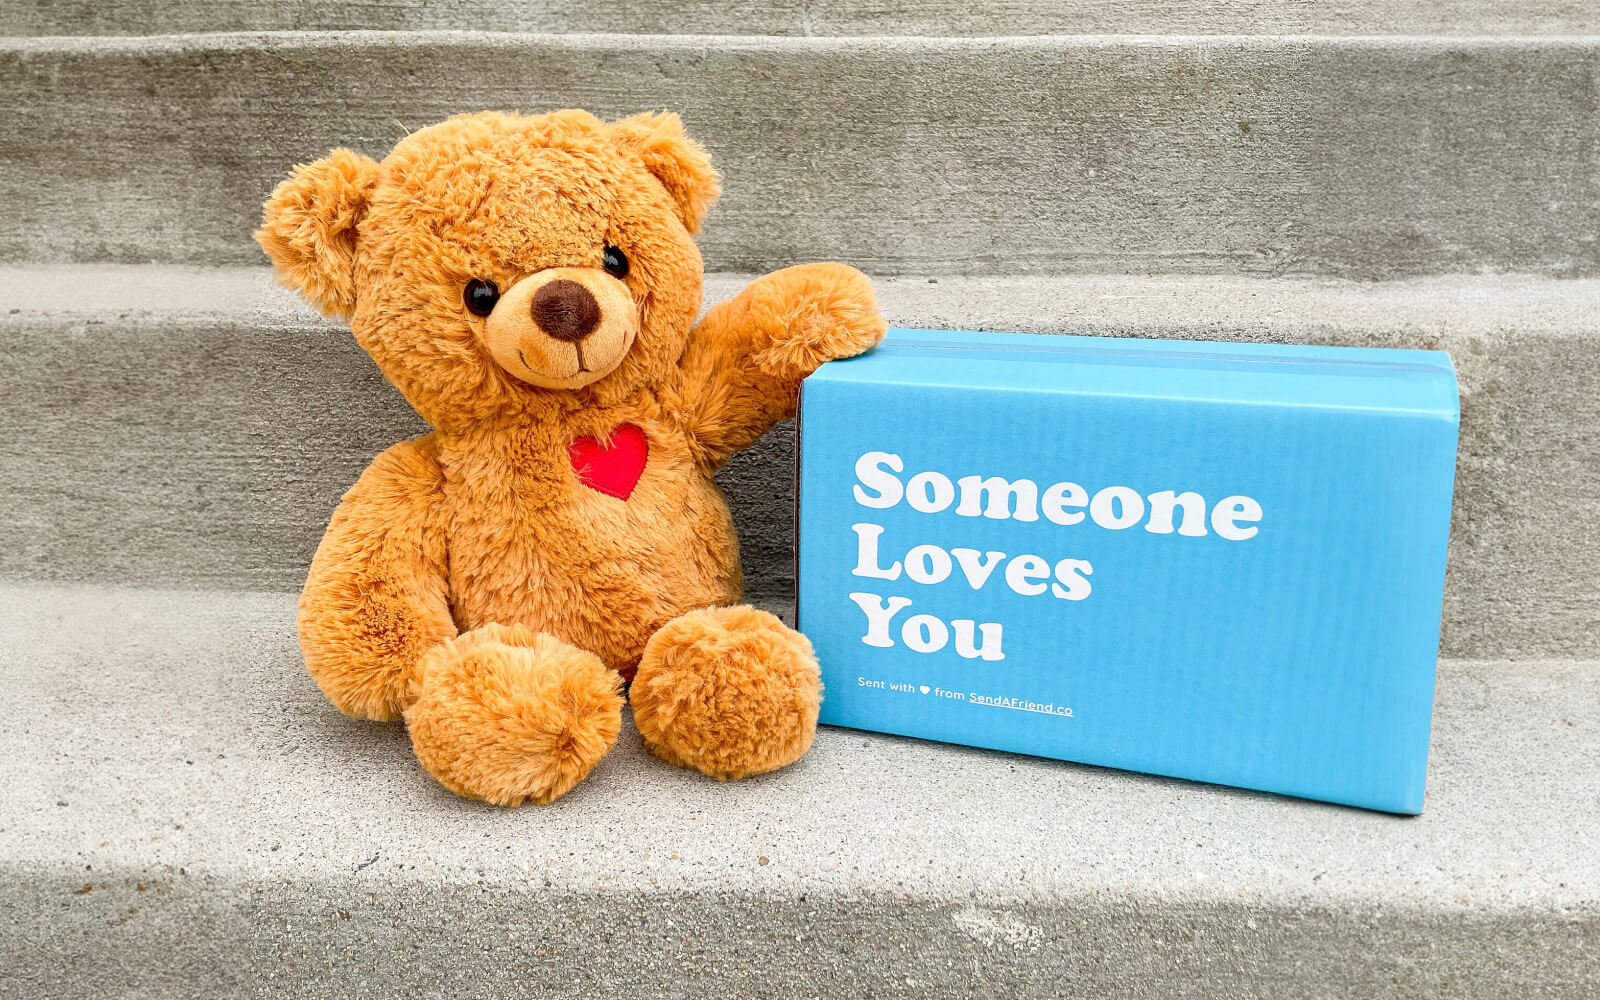 teddy bear next to "someone loves you" box